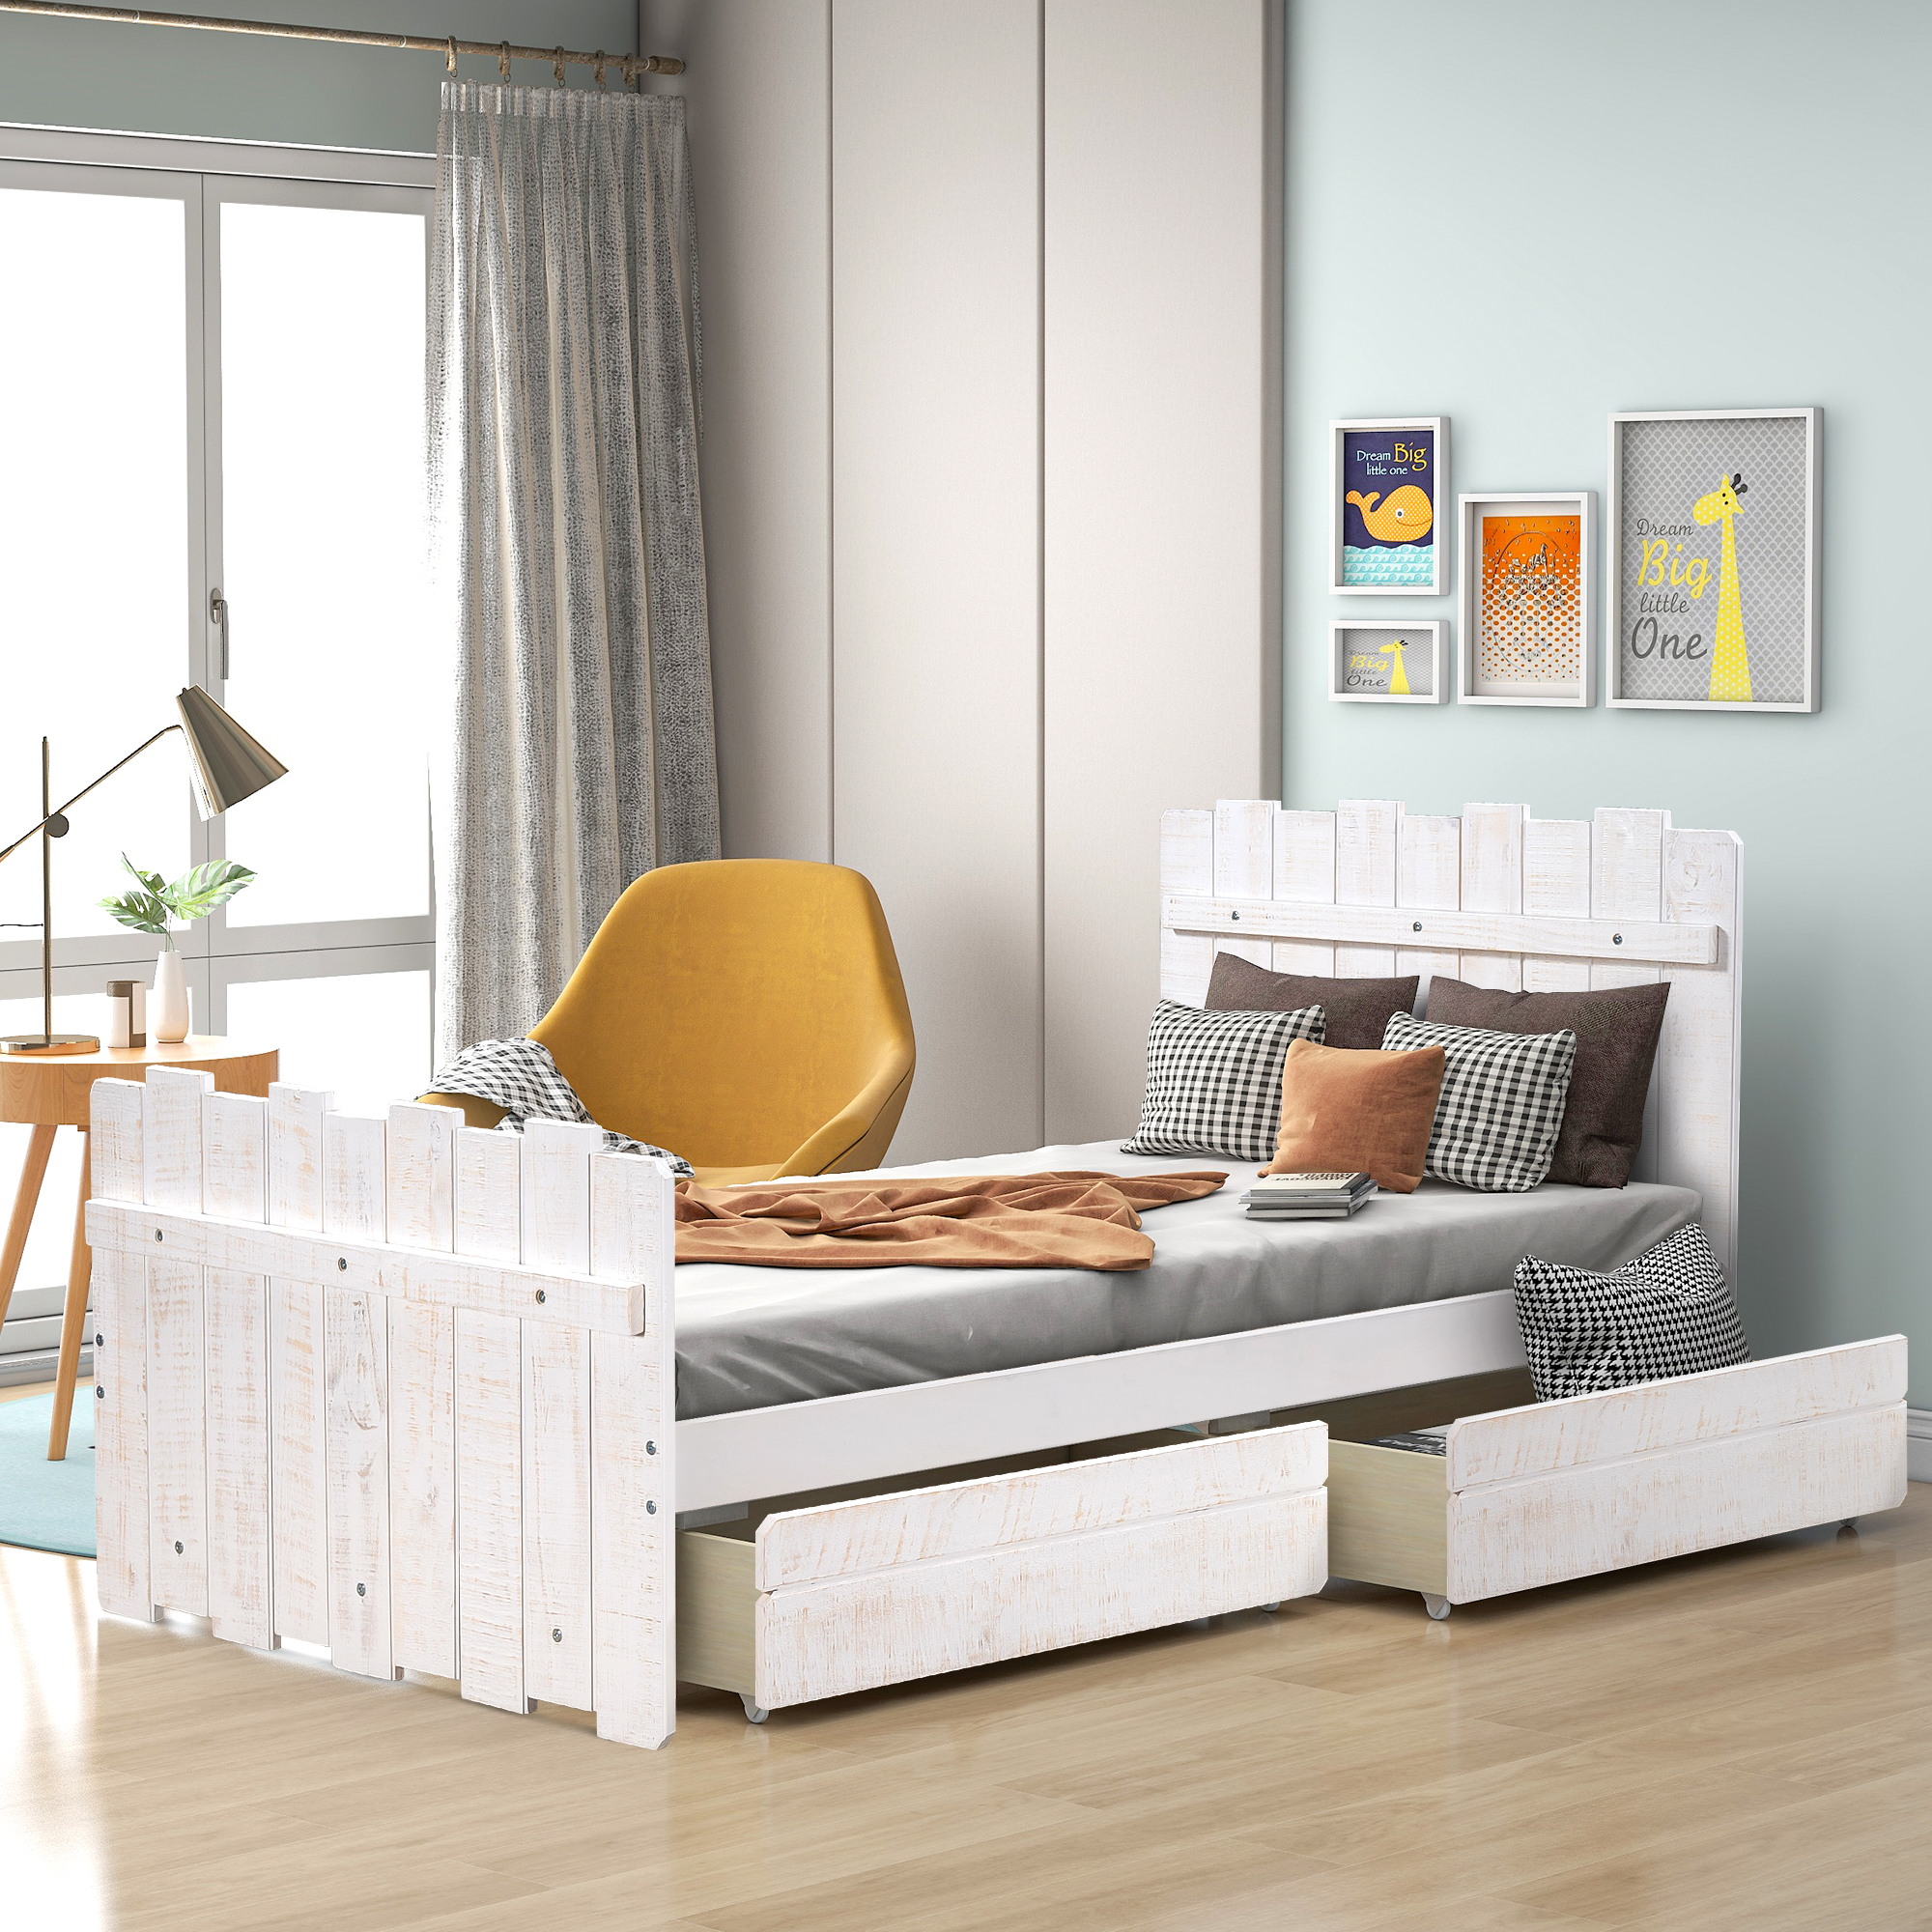 Twin Size Platform Bed with Drawers, Vintage Fence-shaped Headboard and Footboard, Rustic Style, White-Boyel Living